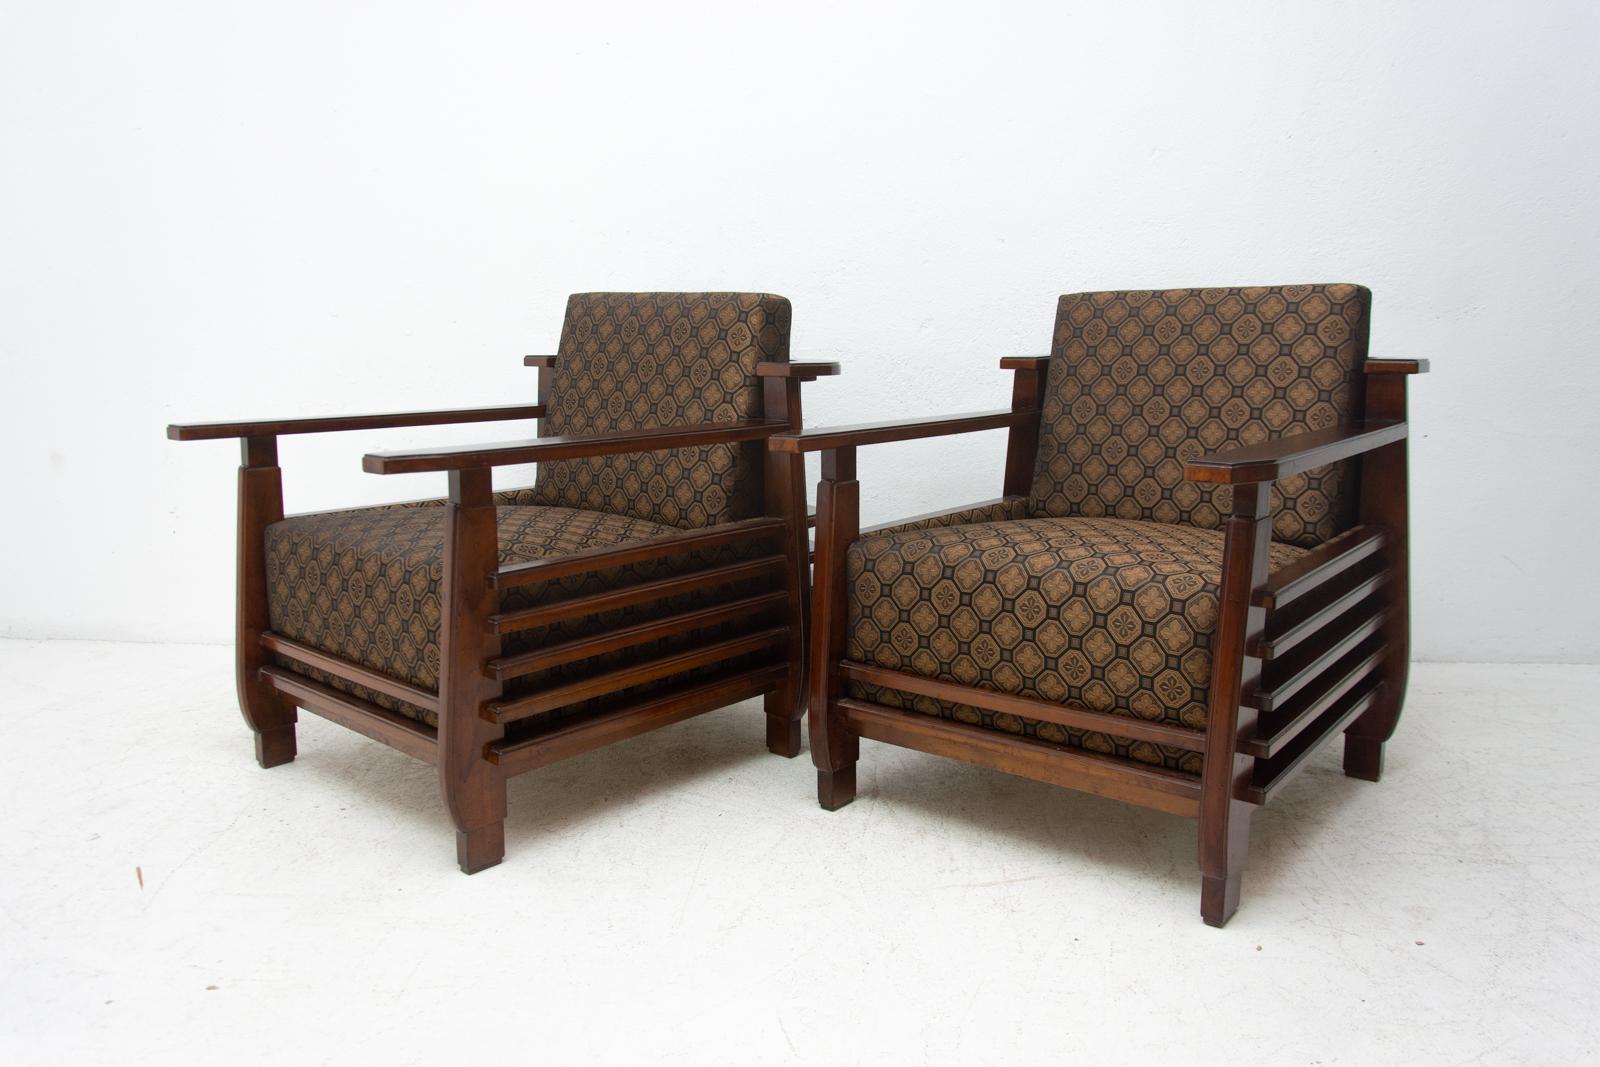 Pair of Fully Restored Functionalist Armchairs, 1930s, Austria, Bauhaus Period In Excellent Condition For Sale In Prague 8, CZ